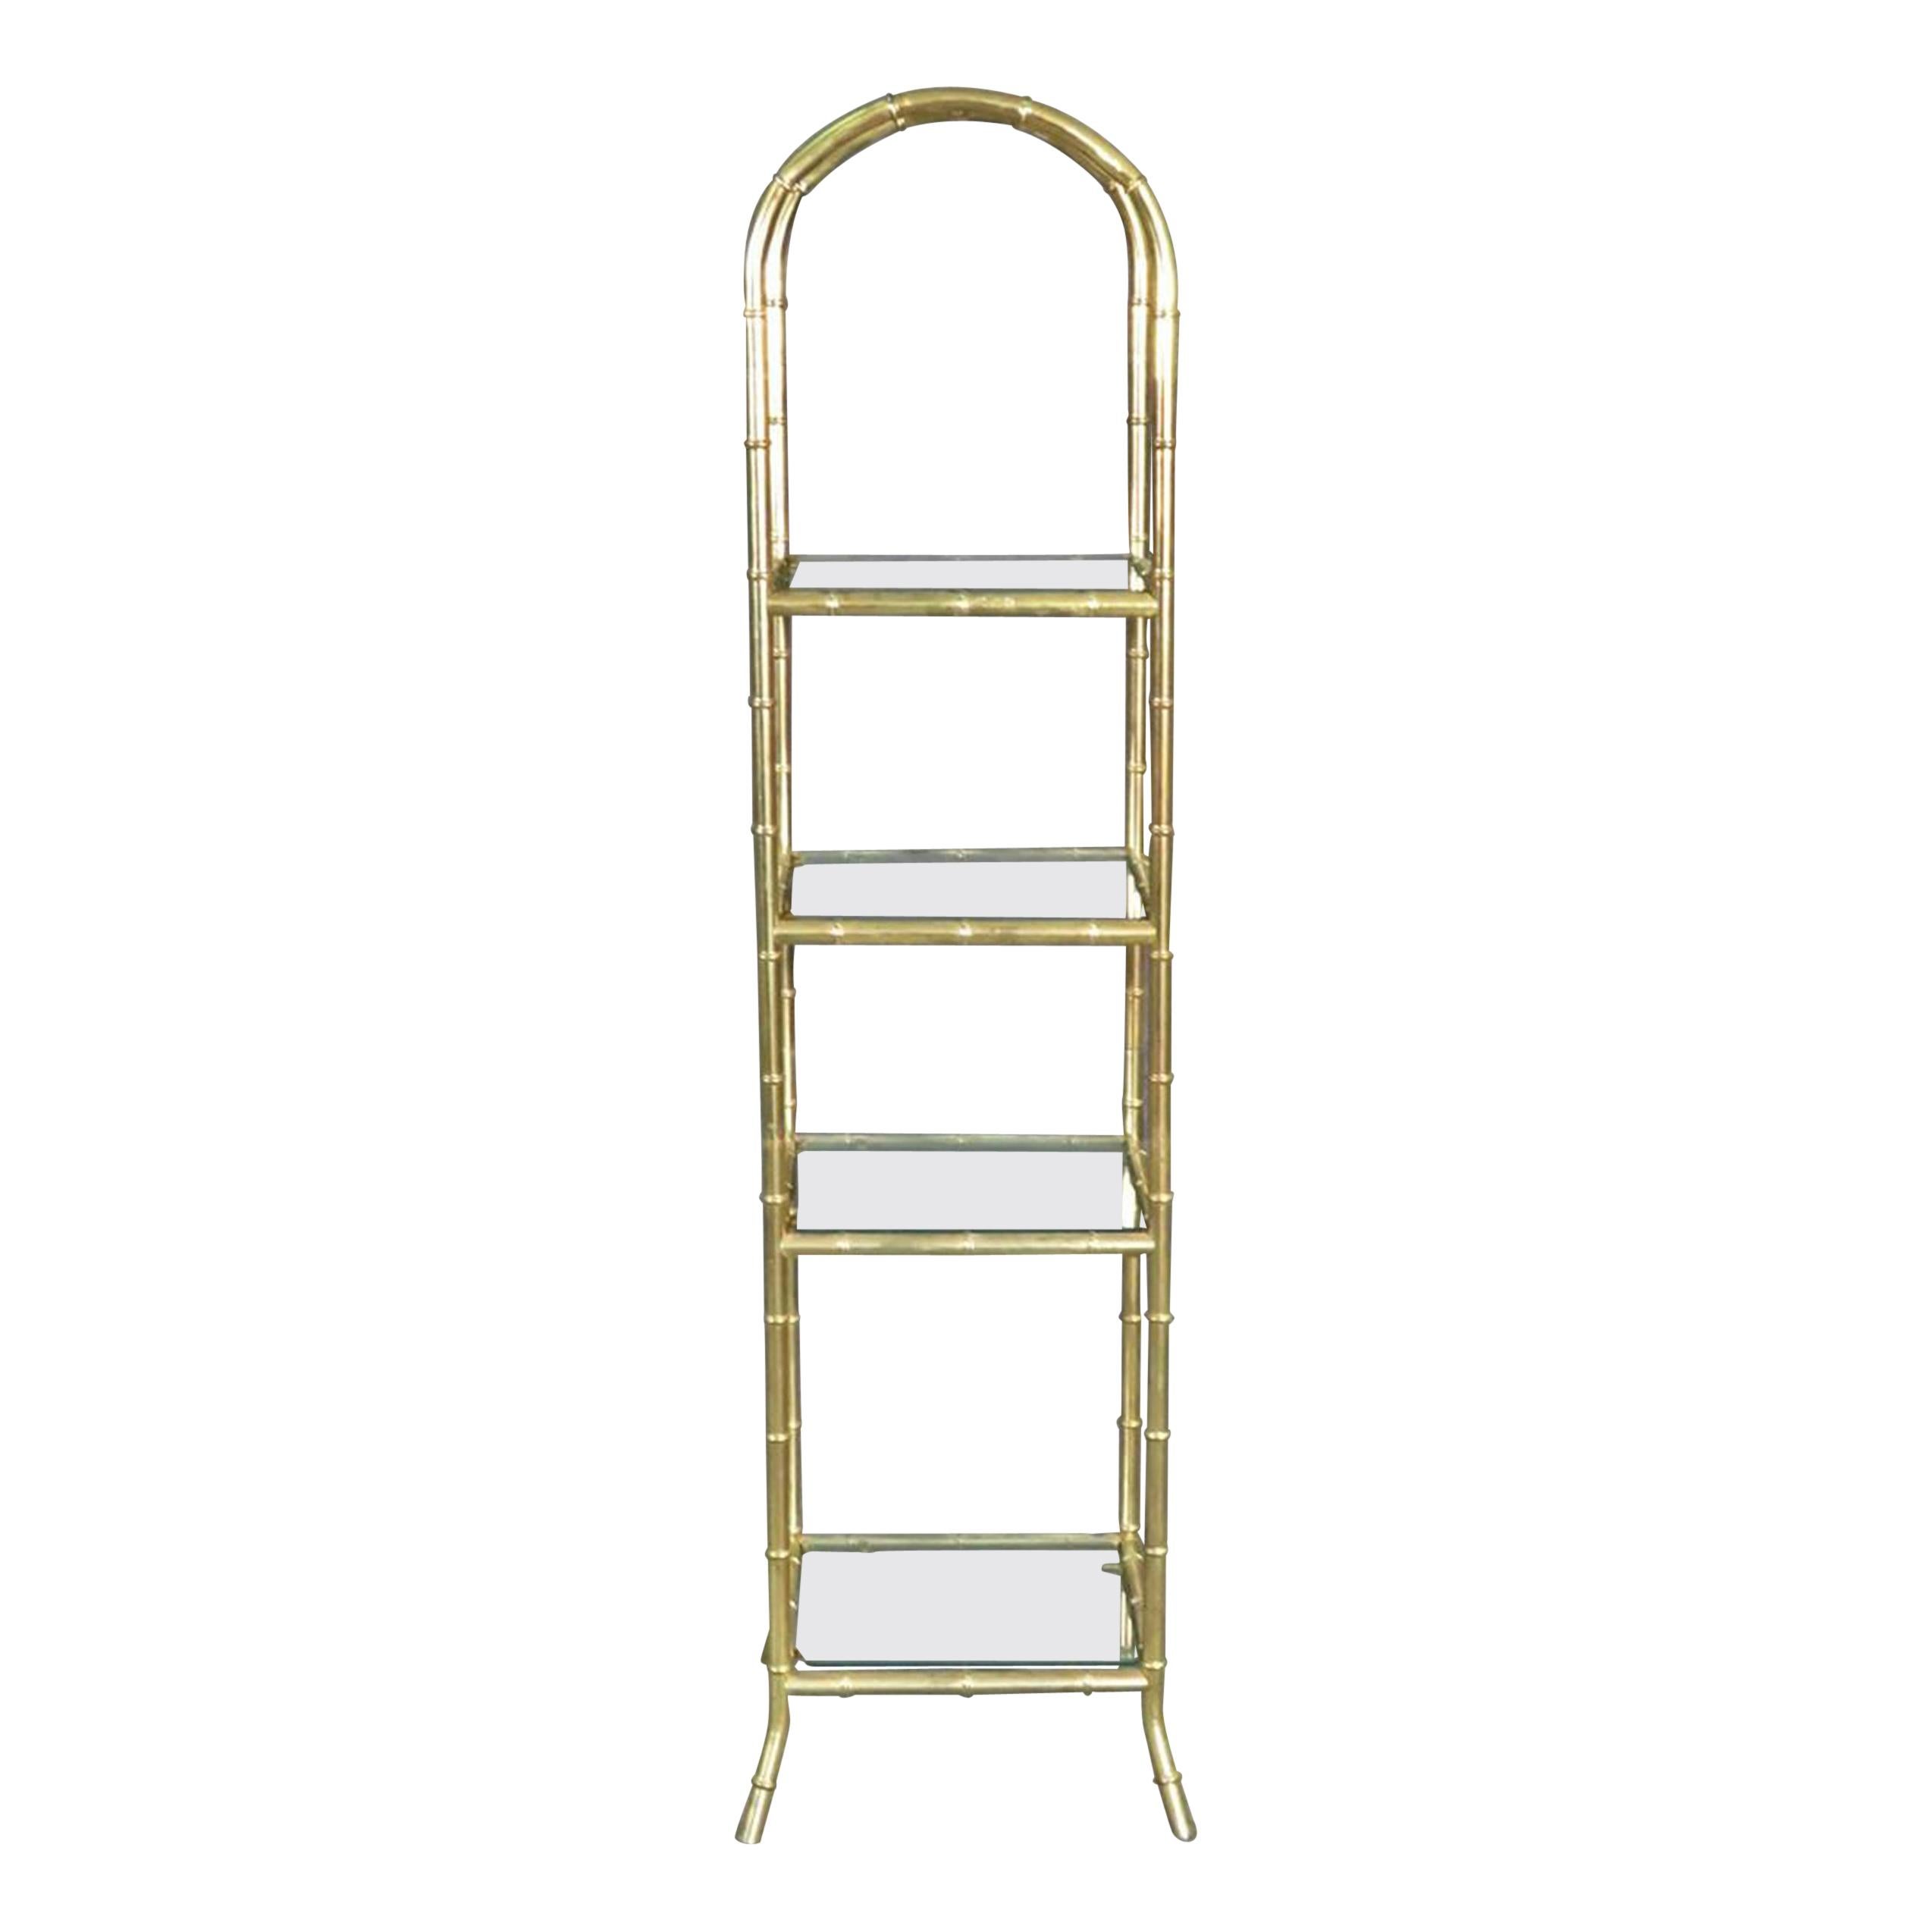 French Arched Bagues Style Petite Faux Bamboo Brass Etagere Shelf, Circa 1950s